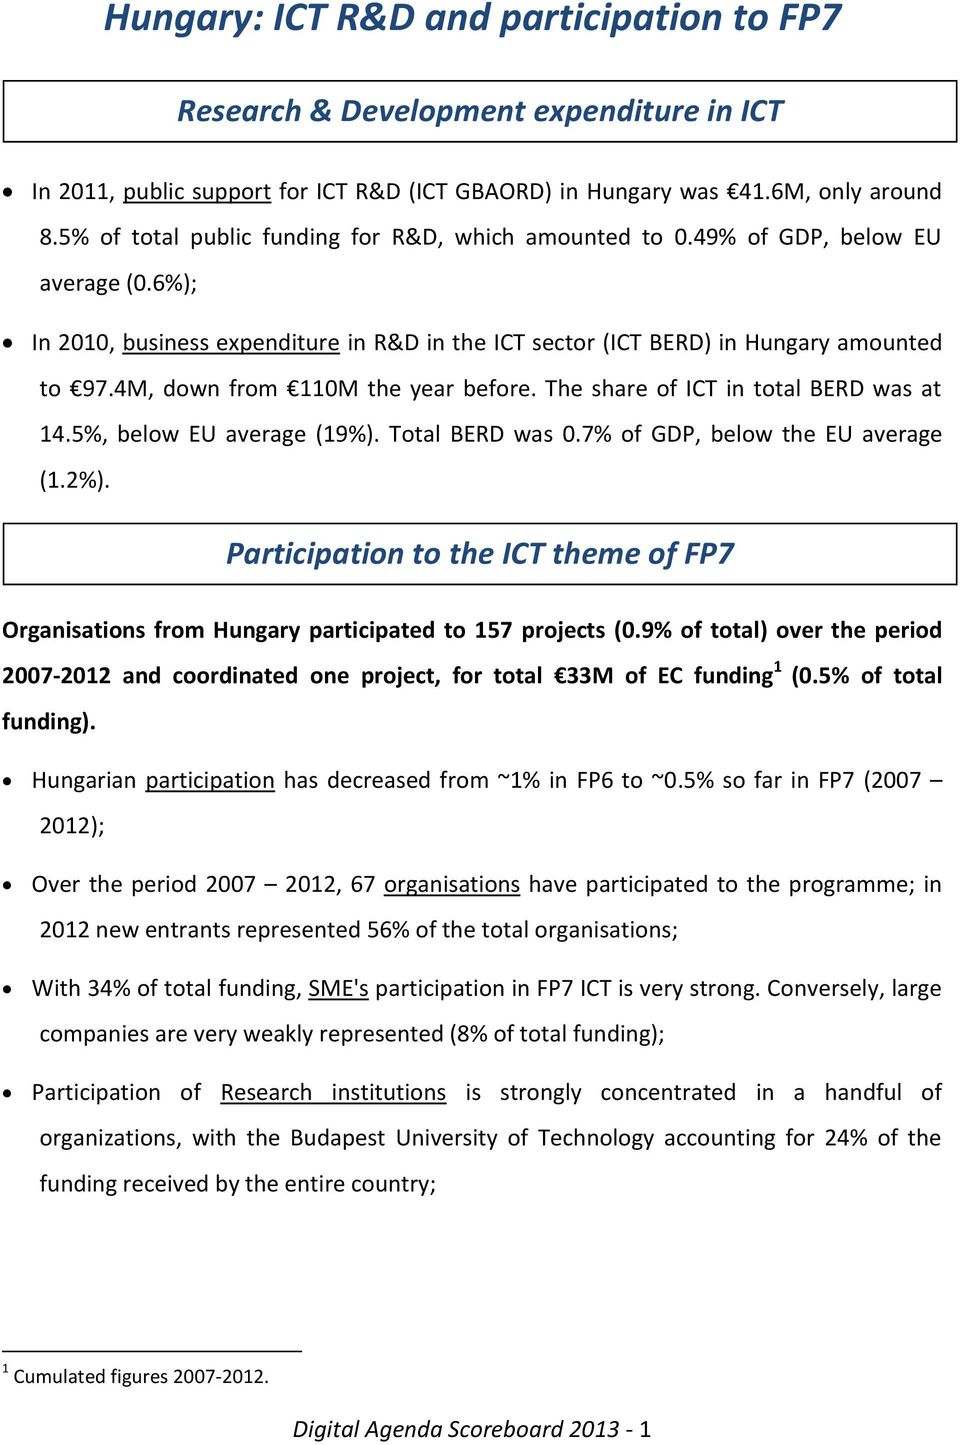 4M, down from 110M the year before. The share of ICT in total BERD was at 14.5%, below EU average (19%). Total BERD was 0.7% of GDP, below the EU average (1.2%).